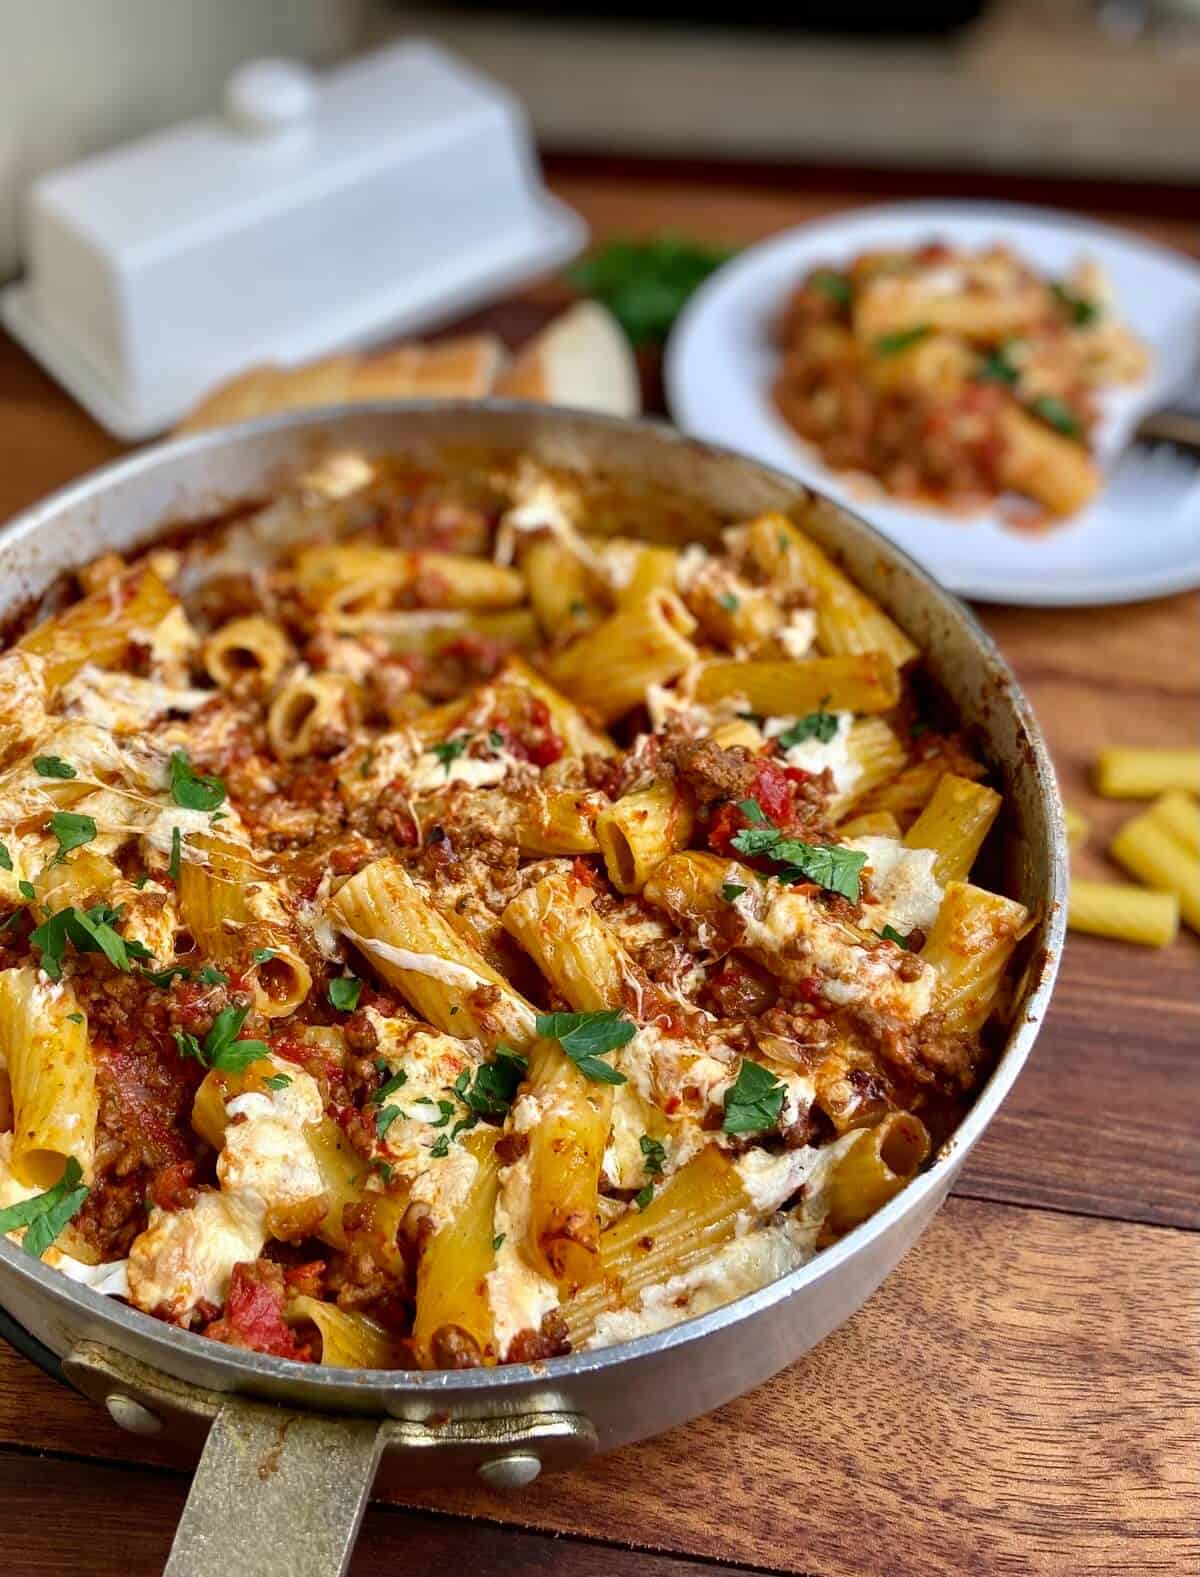 Baked pasta in pan on wood table.